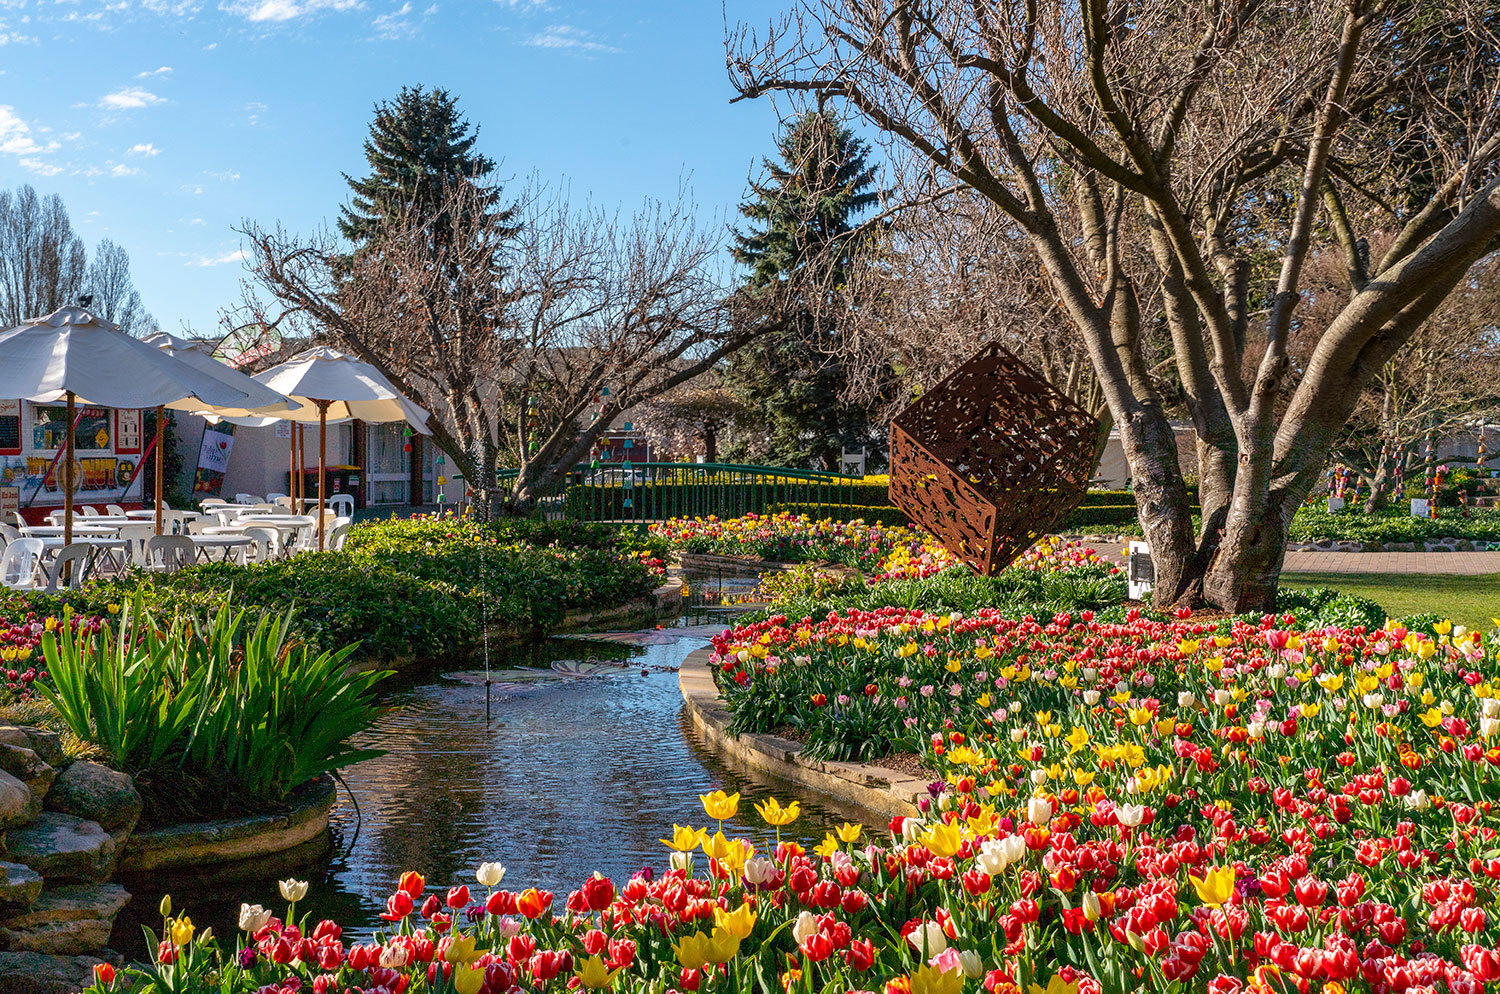  Tulips in full bloom and colour at the annual Tulip Time Festival in Corbett Gardens, Bowral - photo Destination NSW